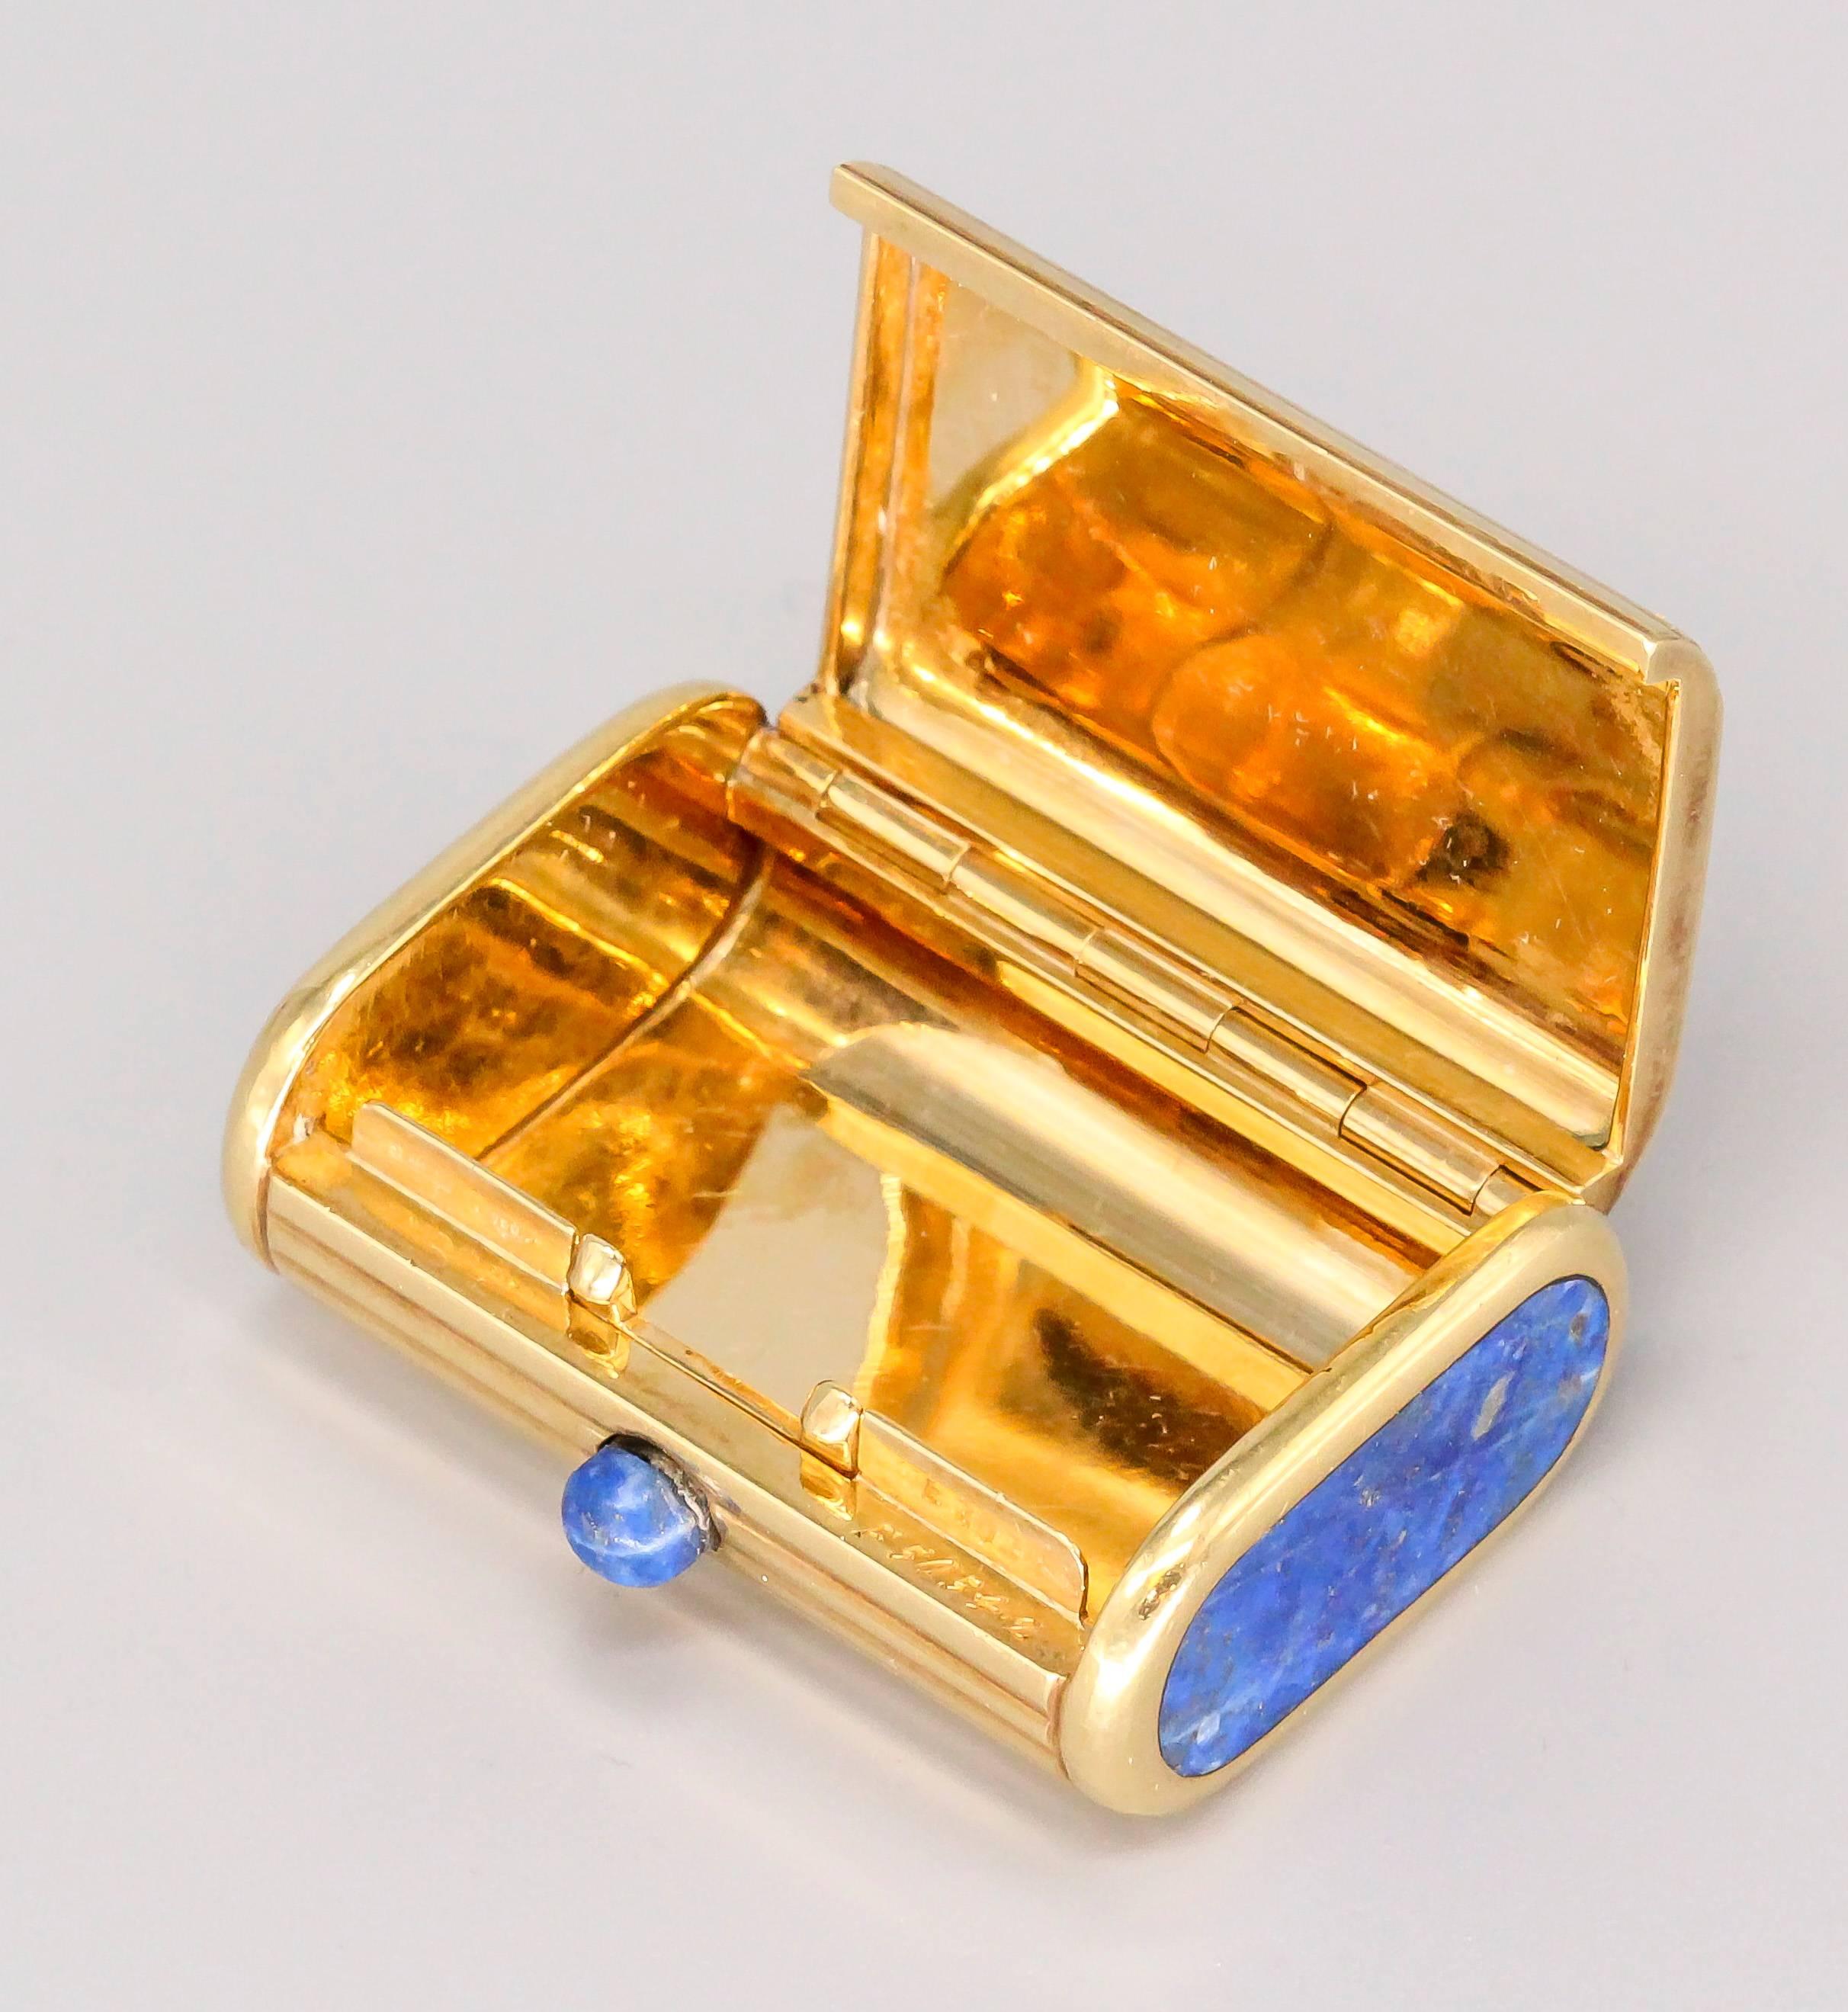 Interesting lapis and 18K yellow gold ribbed pill box of Italian origin. It features a lapis push button that releases a spring loaded lid.
Hallmarks: 750, Italian standard marks, reference numbers.